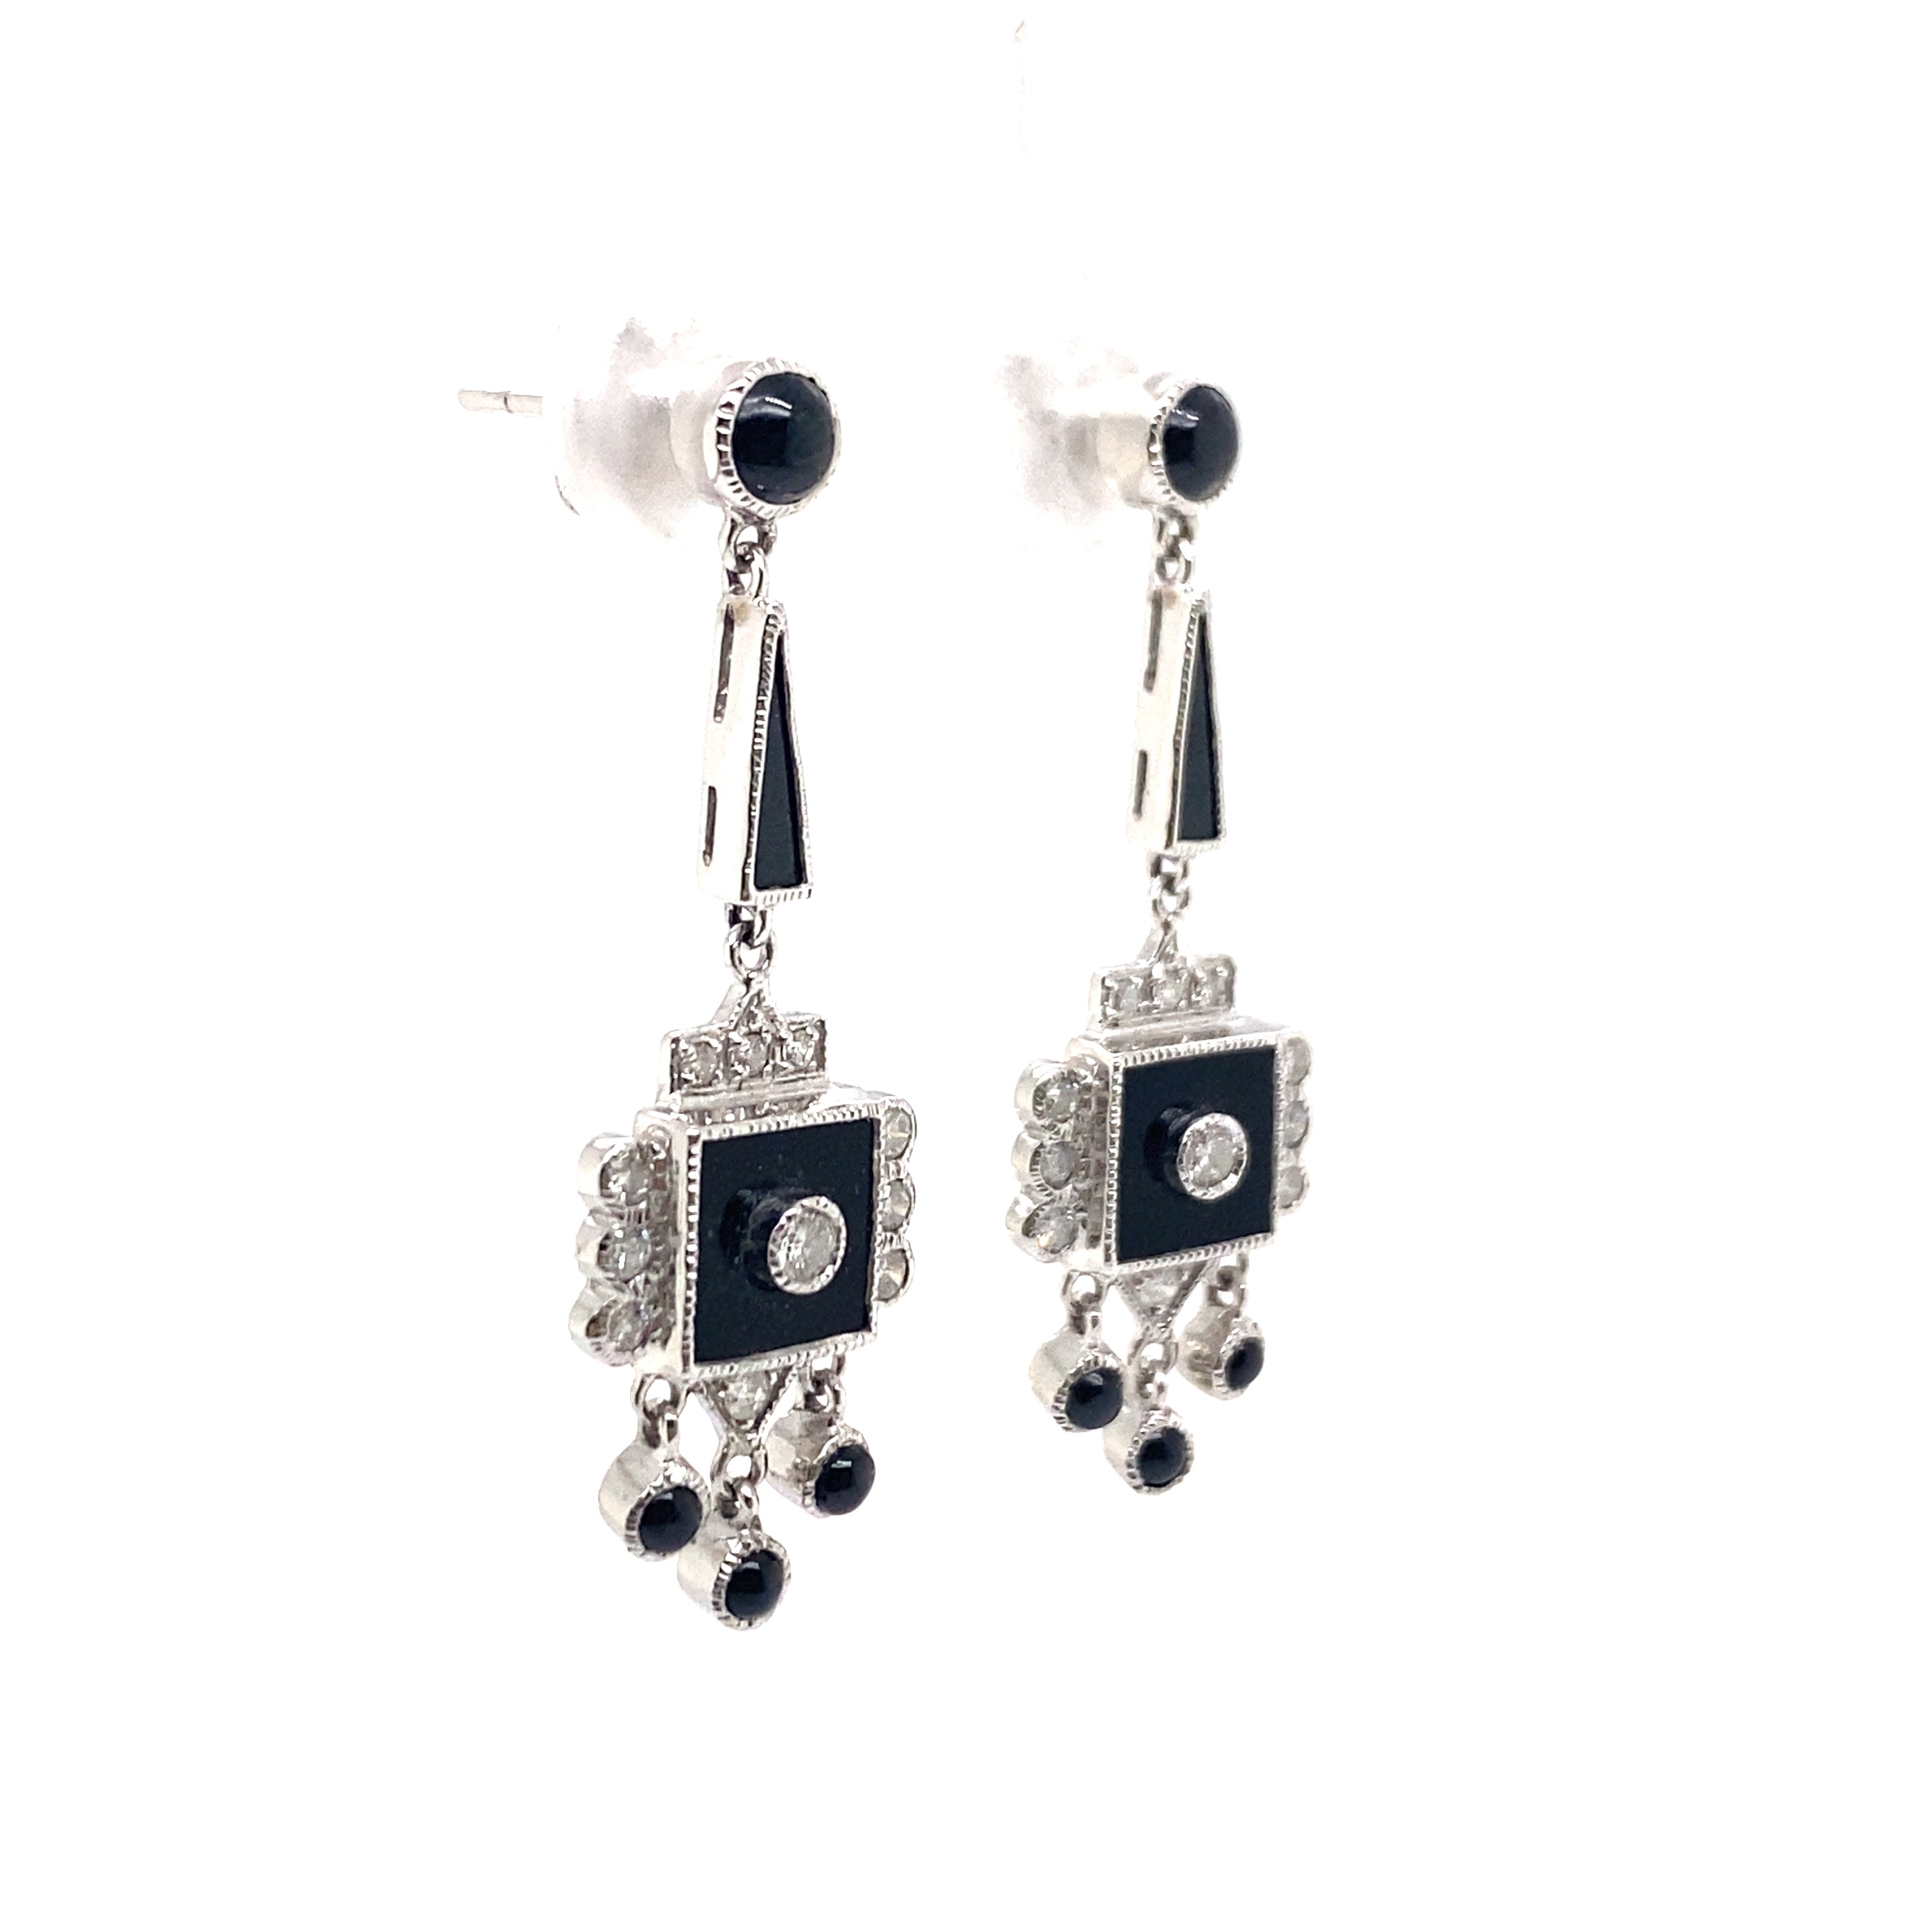 9ct white gold onyx and diamond drop earrings.